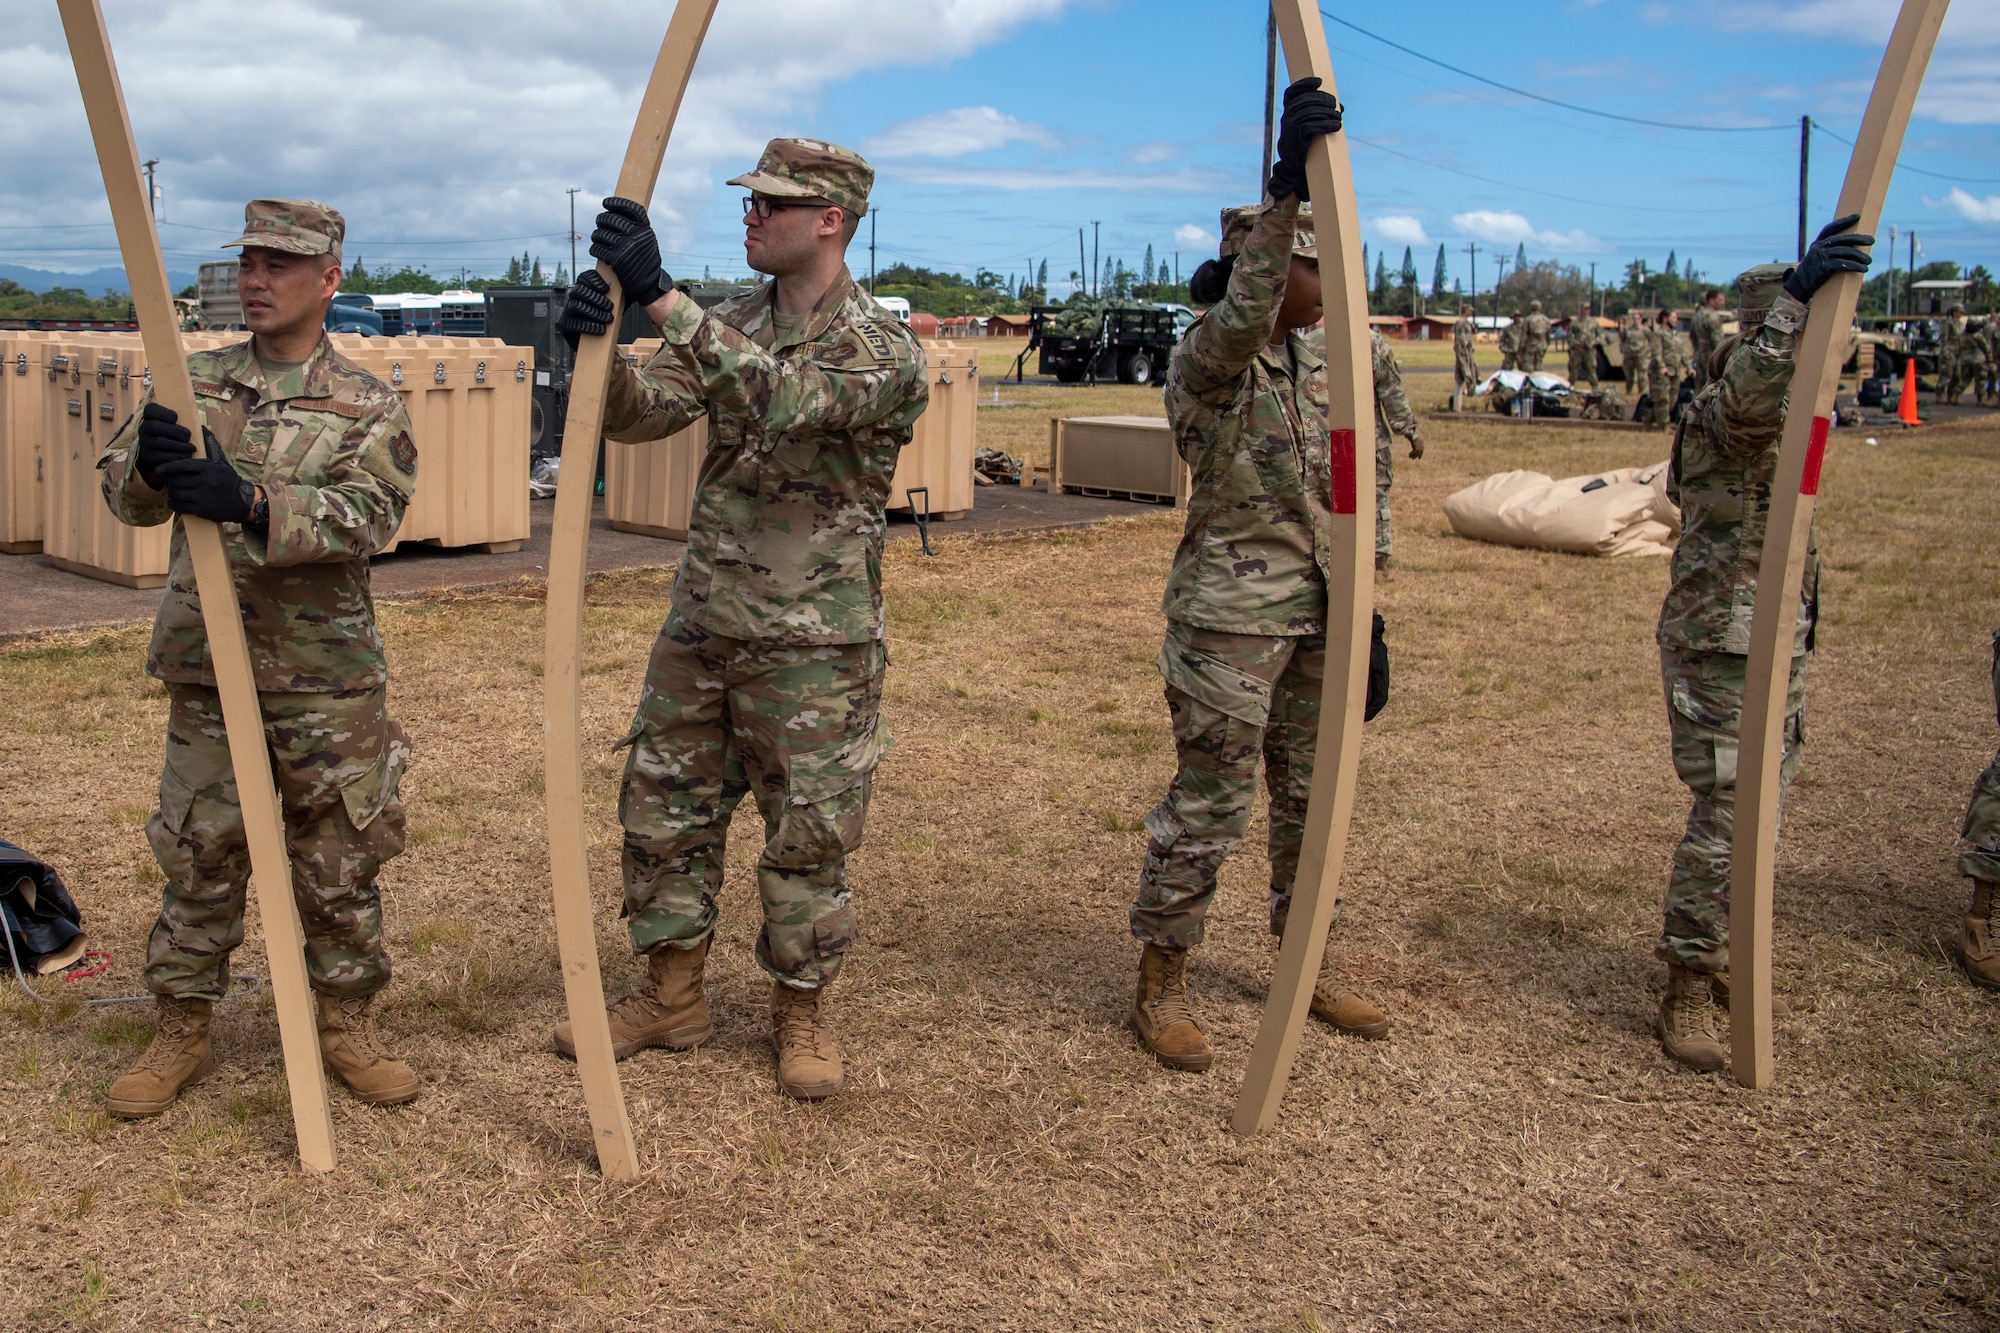 624th Regional Support Group Reserve Citizen Airmen break down Triple S construction tents after a Total Force Integration (TFI) exercise at Schofield Barracks, Hawaii. TFI is a blend of active, Guard, and Reserve personnel working together to accomplish the mission.